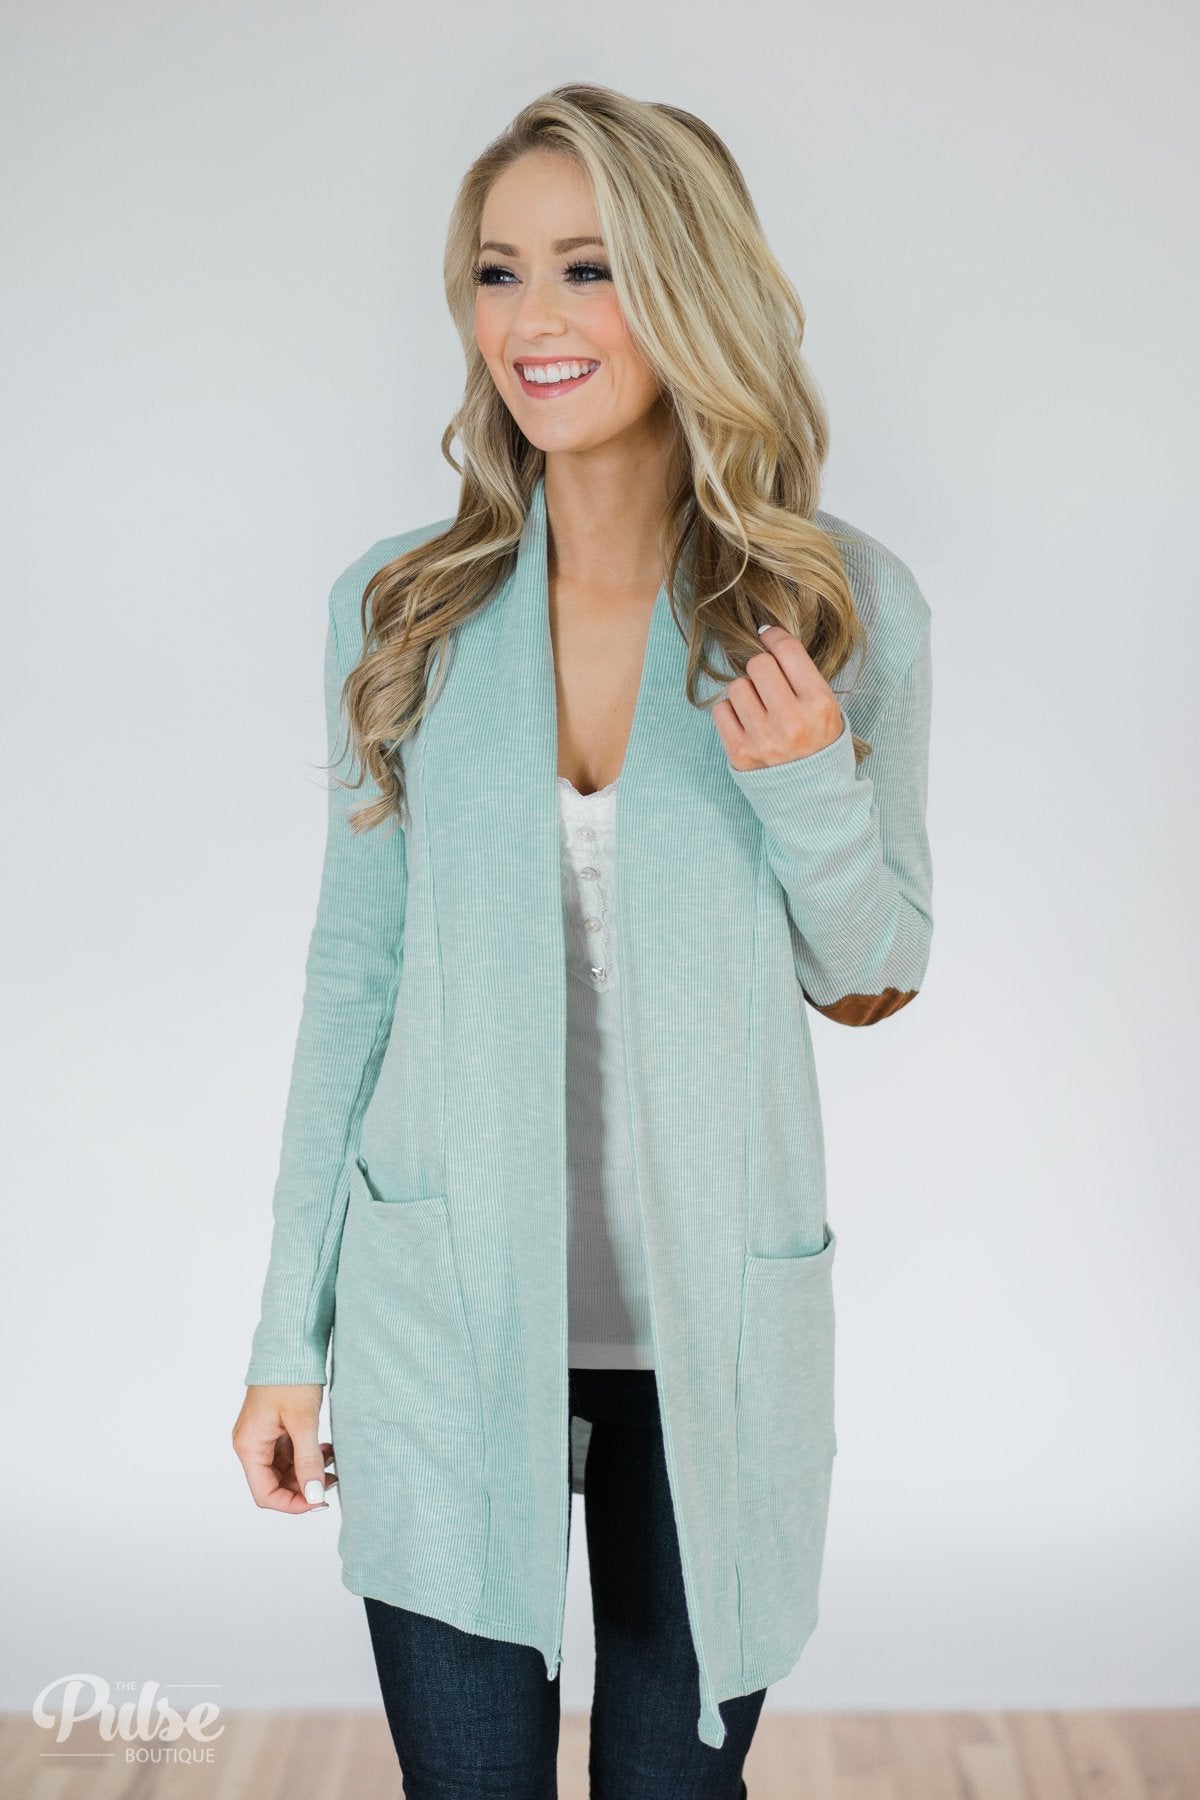 As Long As You Need Elbow Patch Cardigan- Bright Mint